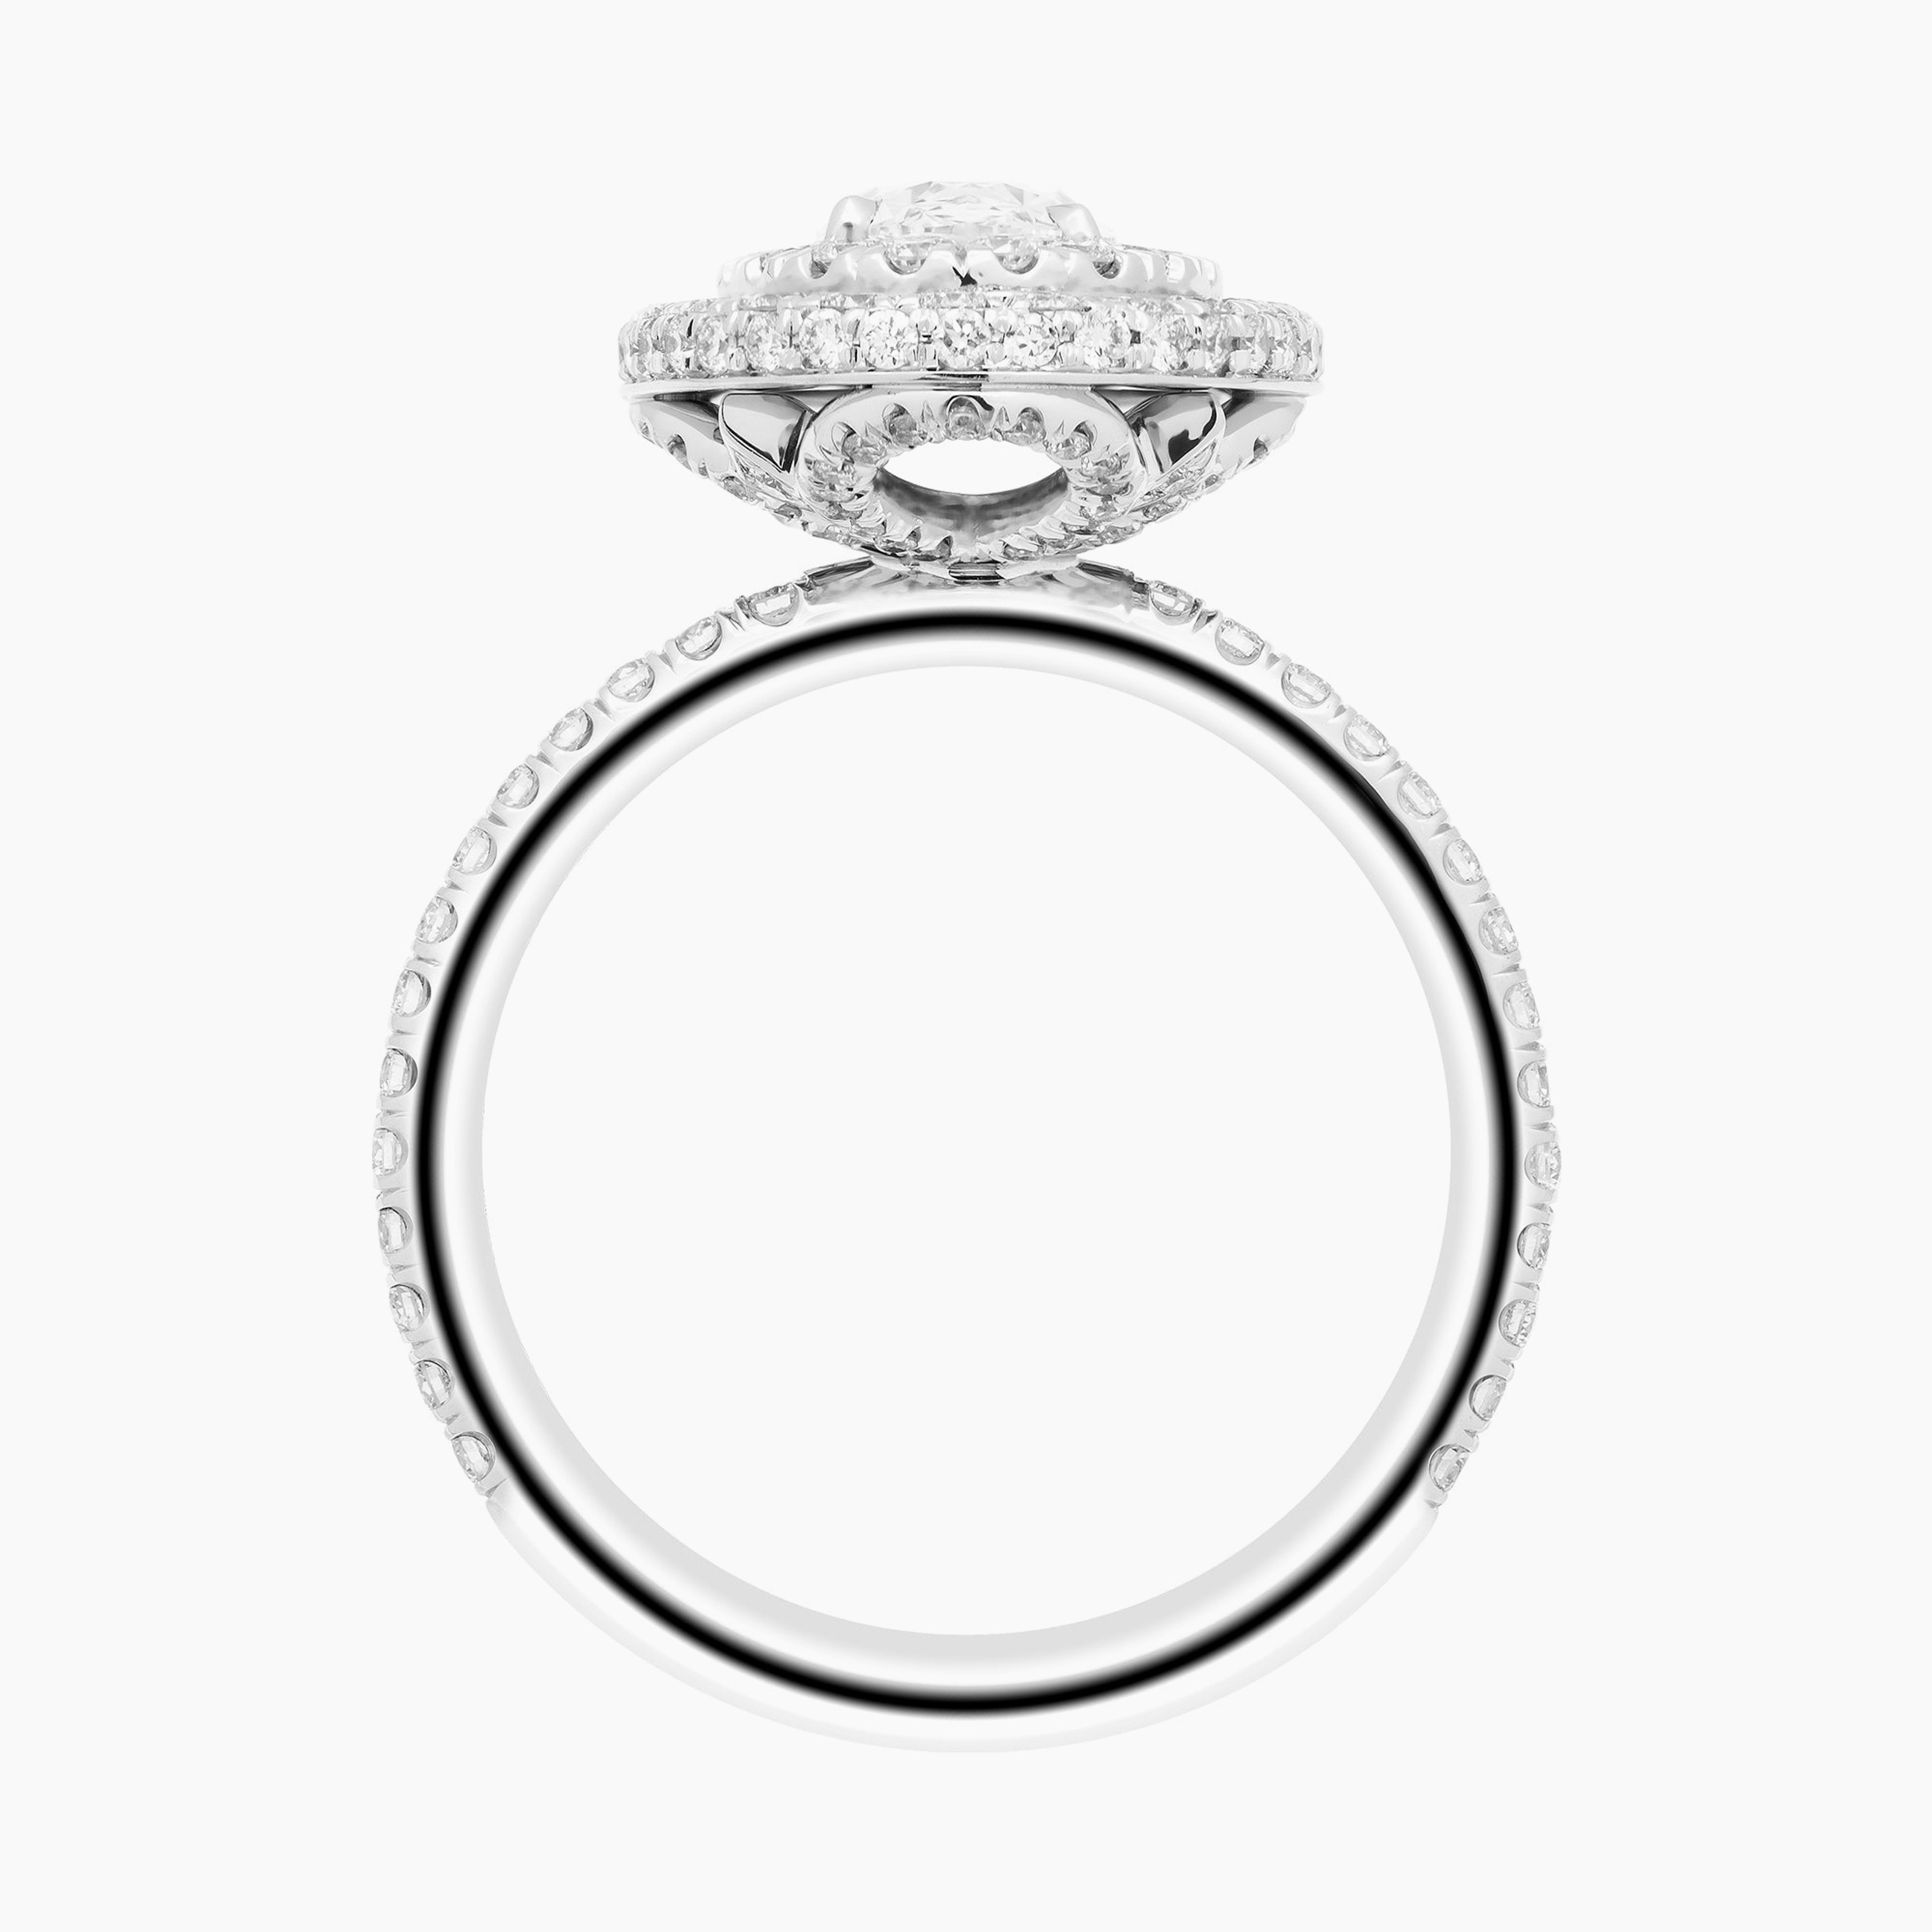 GIA Certificate 1.01 Carat Oval F VS1 Diamond Engagement Ring